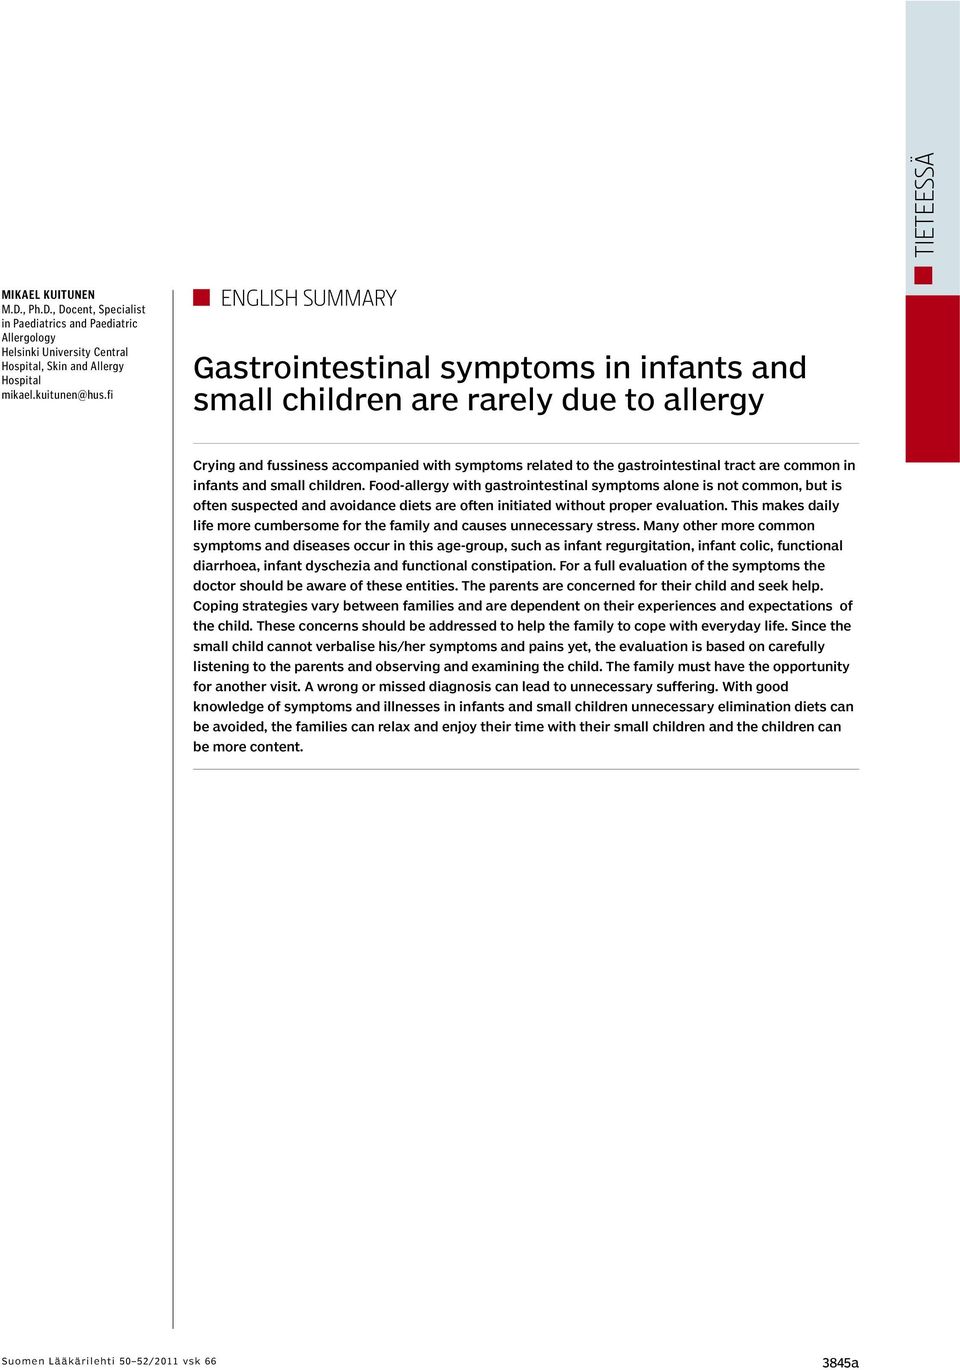 infants and small children. Food-allergy with gastrointestinal symptoms alone is not common, but is often suspected and avoidance diets are often initiated without proper evaluation.